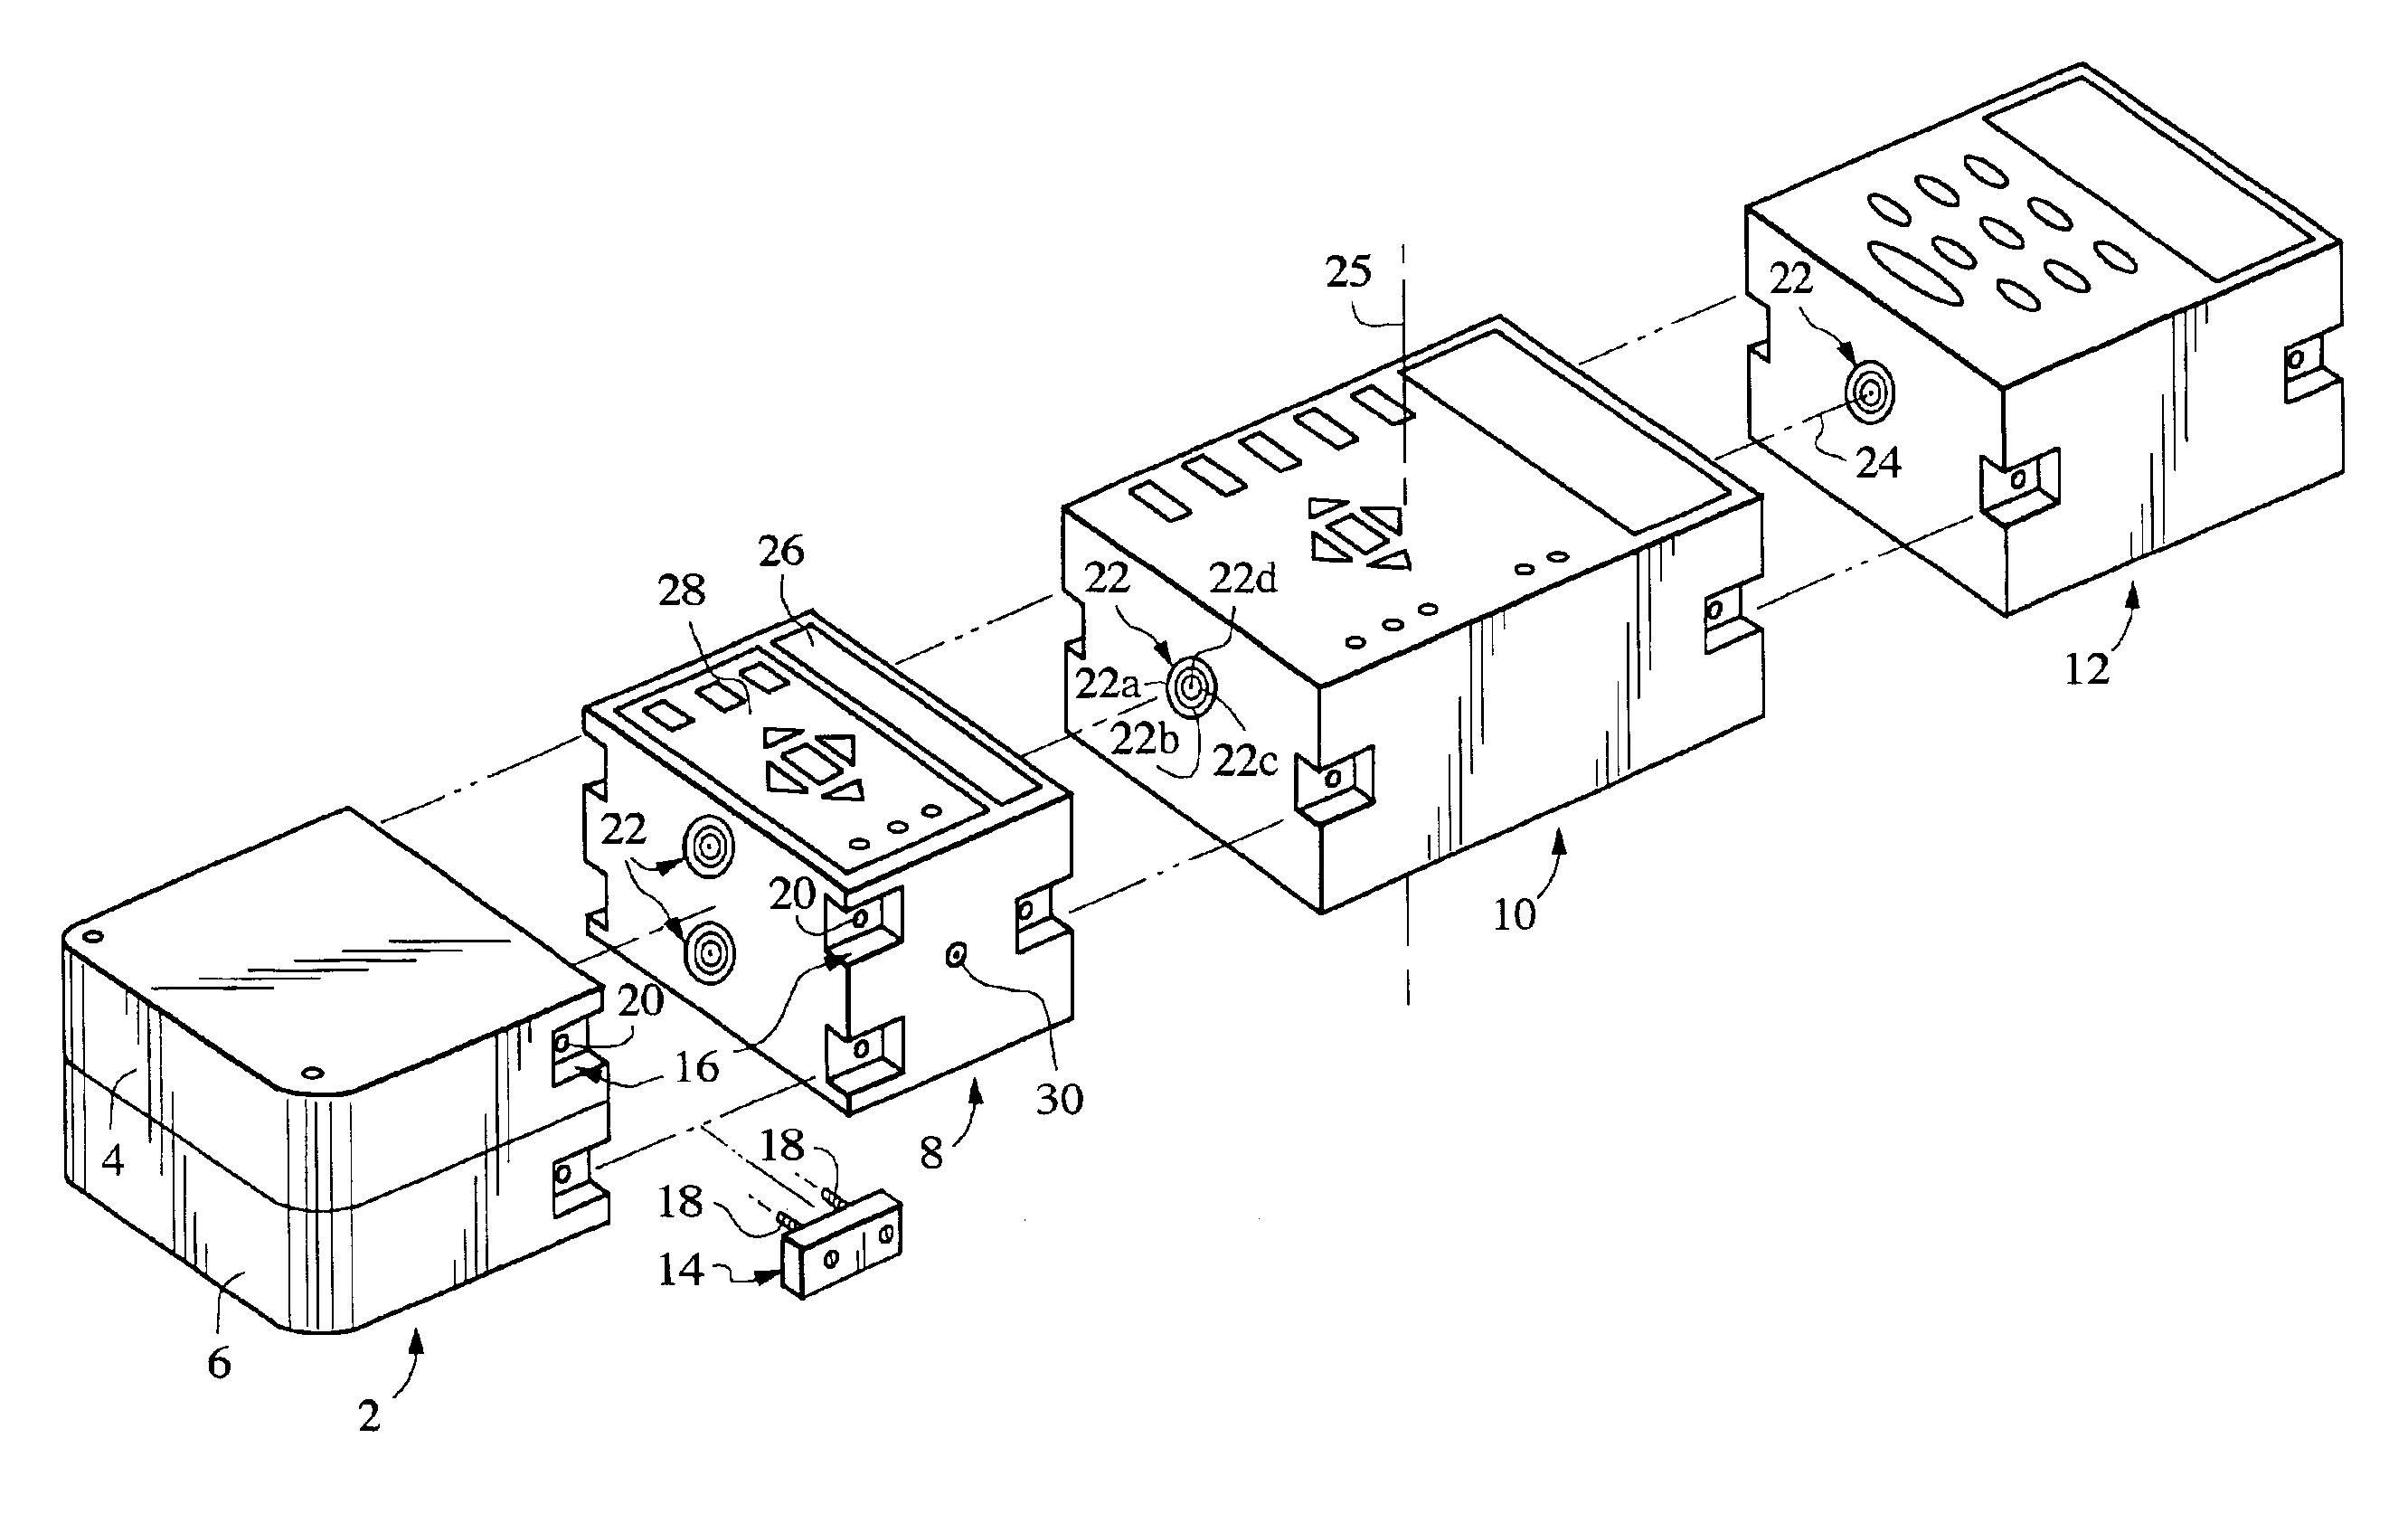 Portable modular electronic system with symmetrical connections